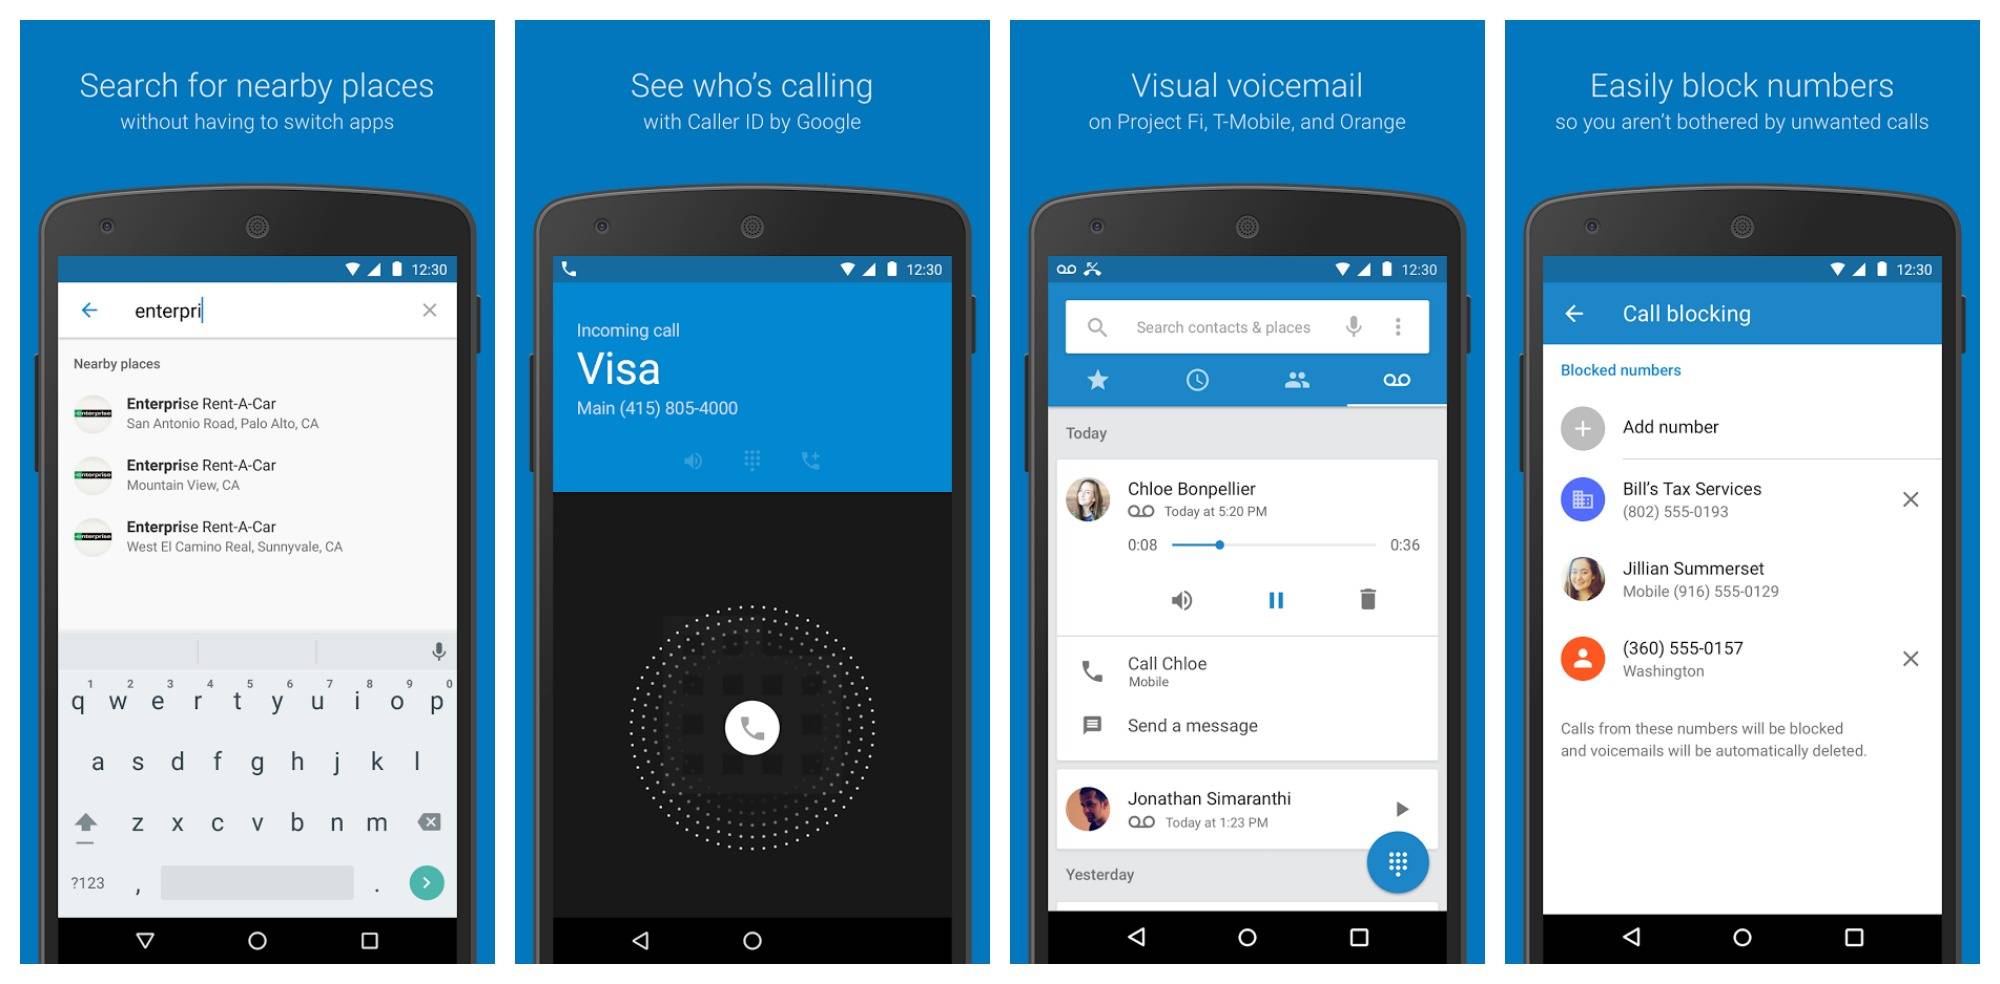 Visual voicemail now available for T-Mobile customers too - Android